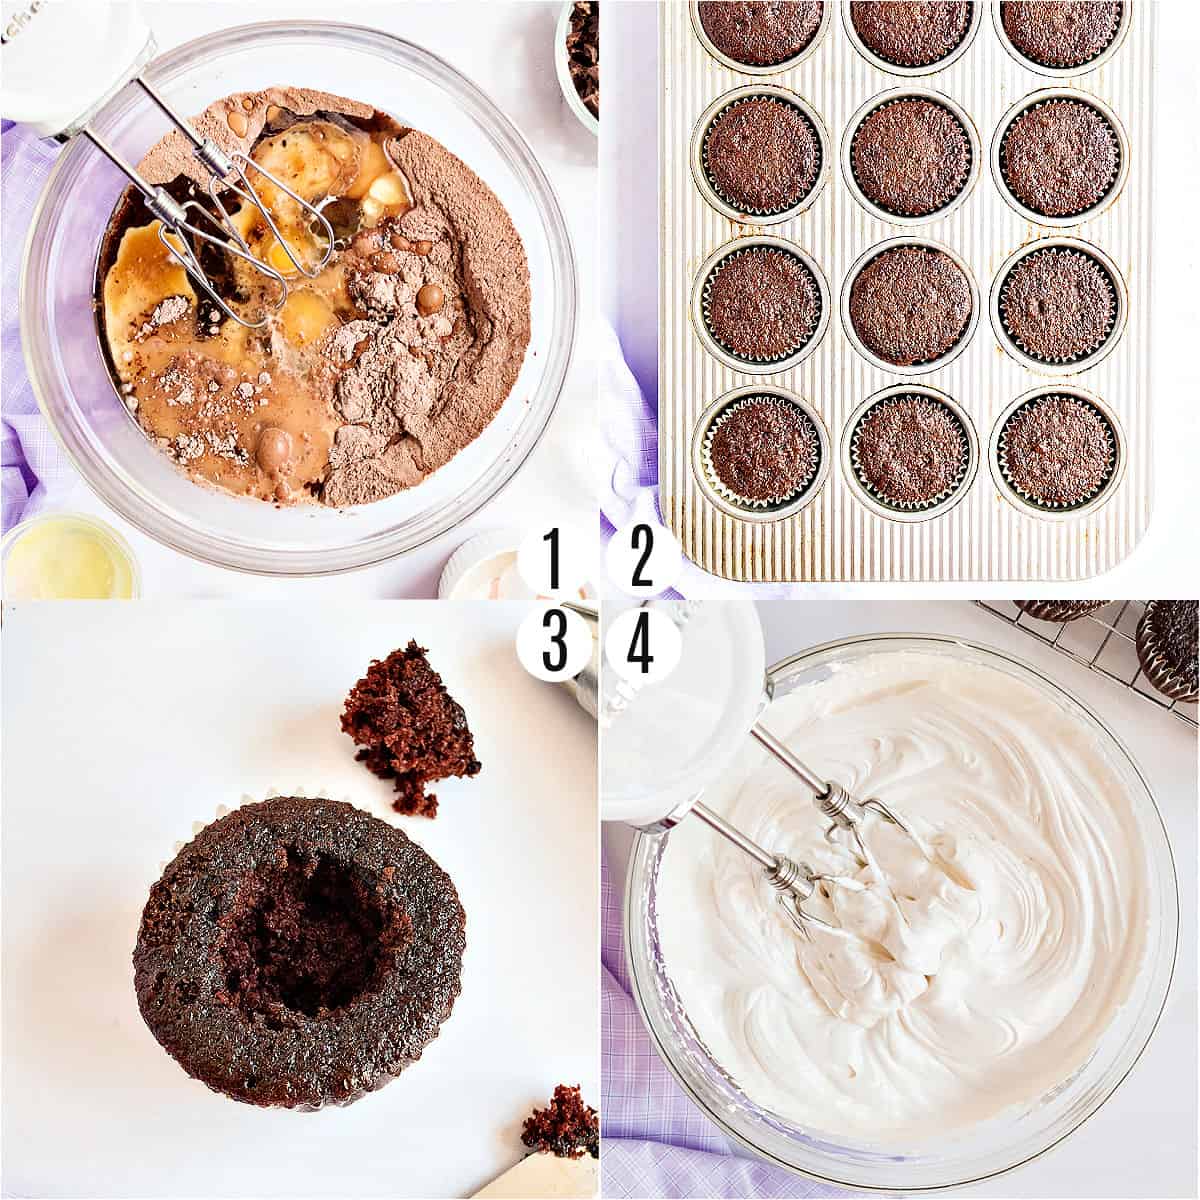 Step by step photos showing how to make chocolate hostess cupcakes.